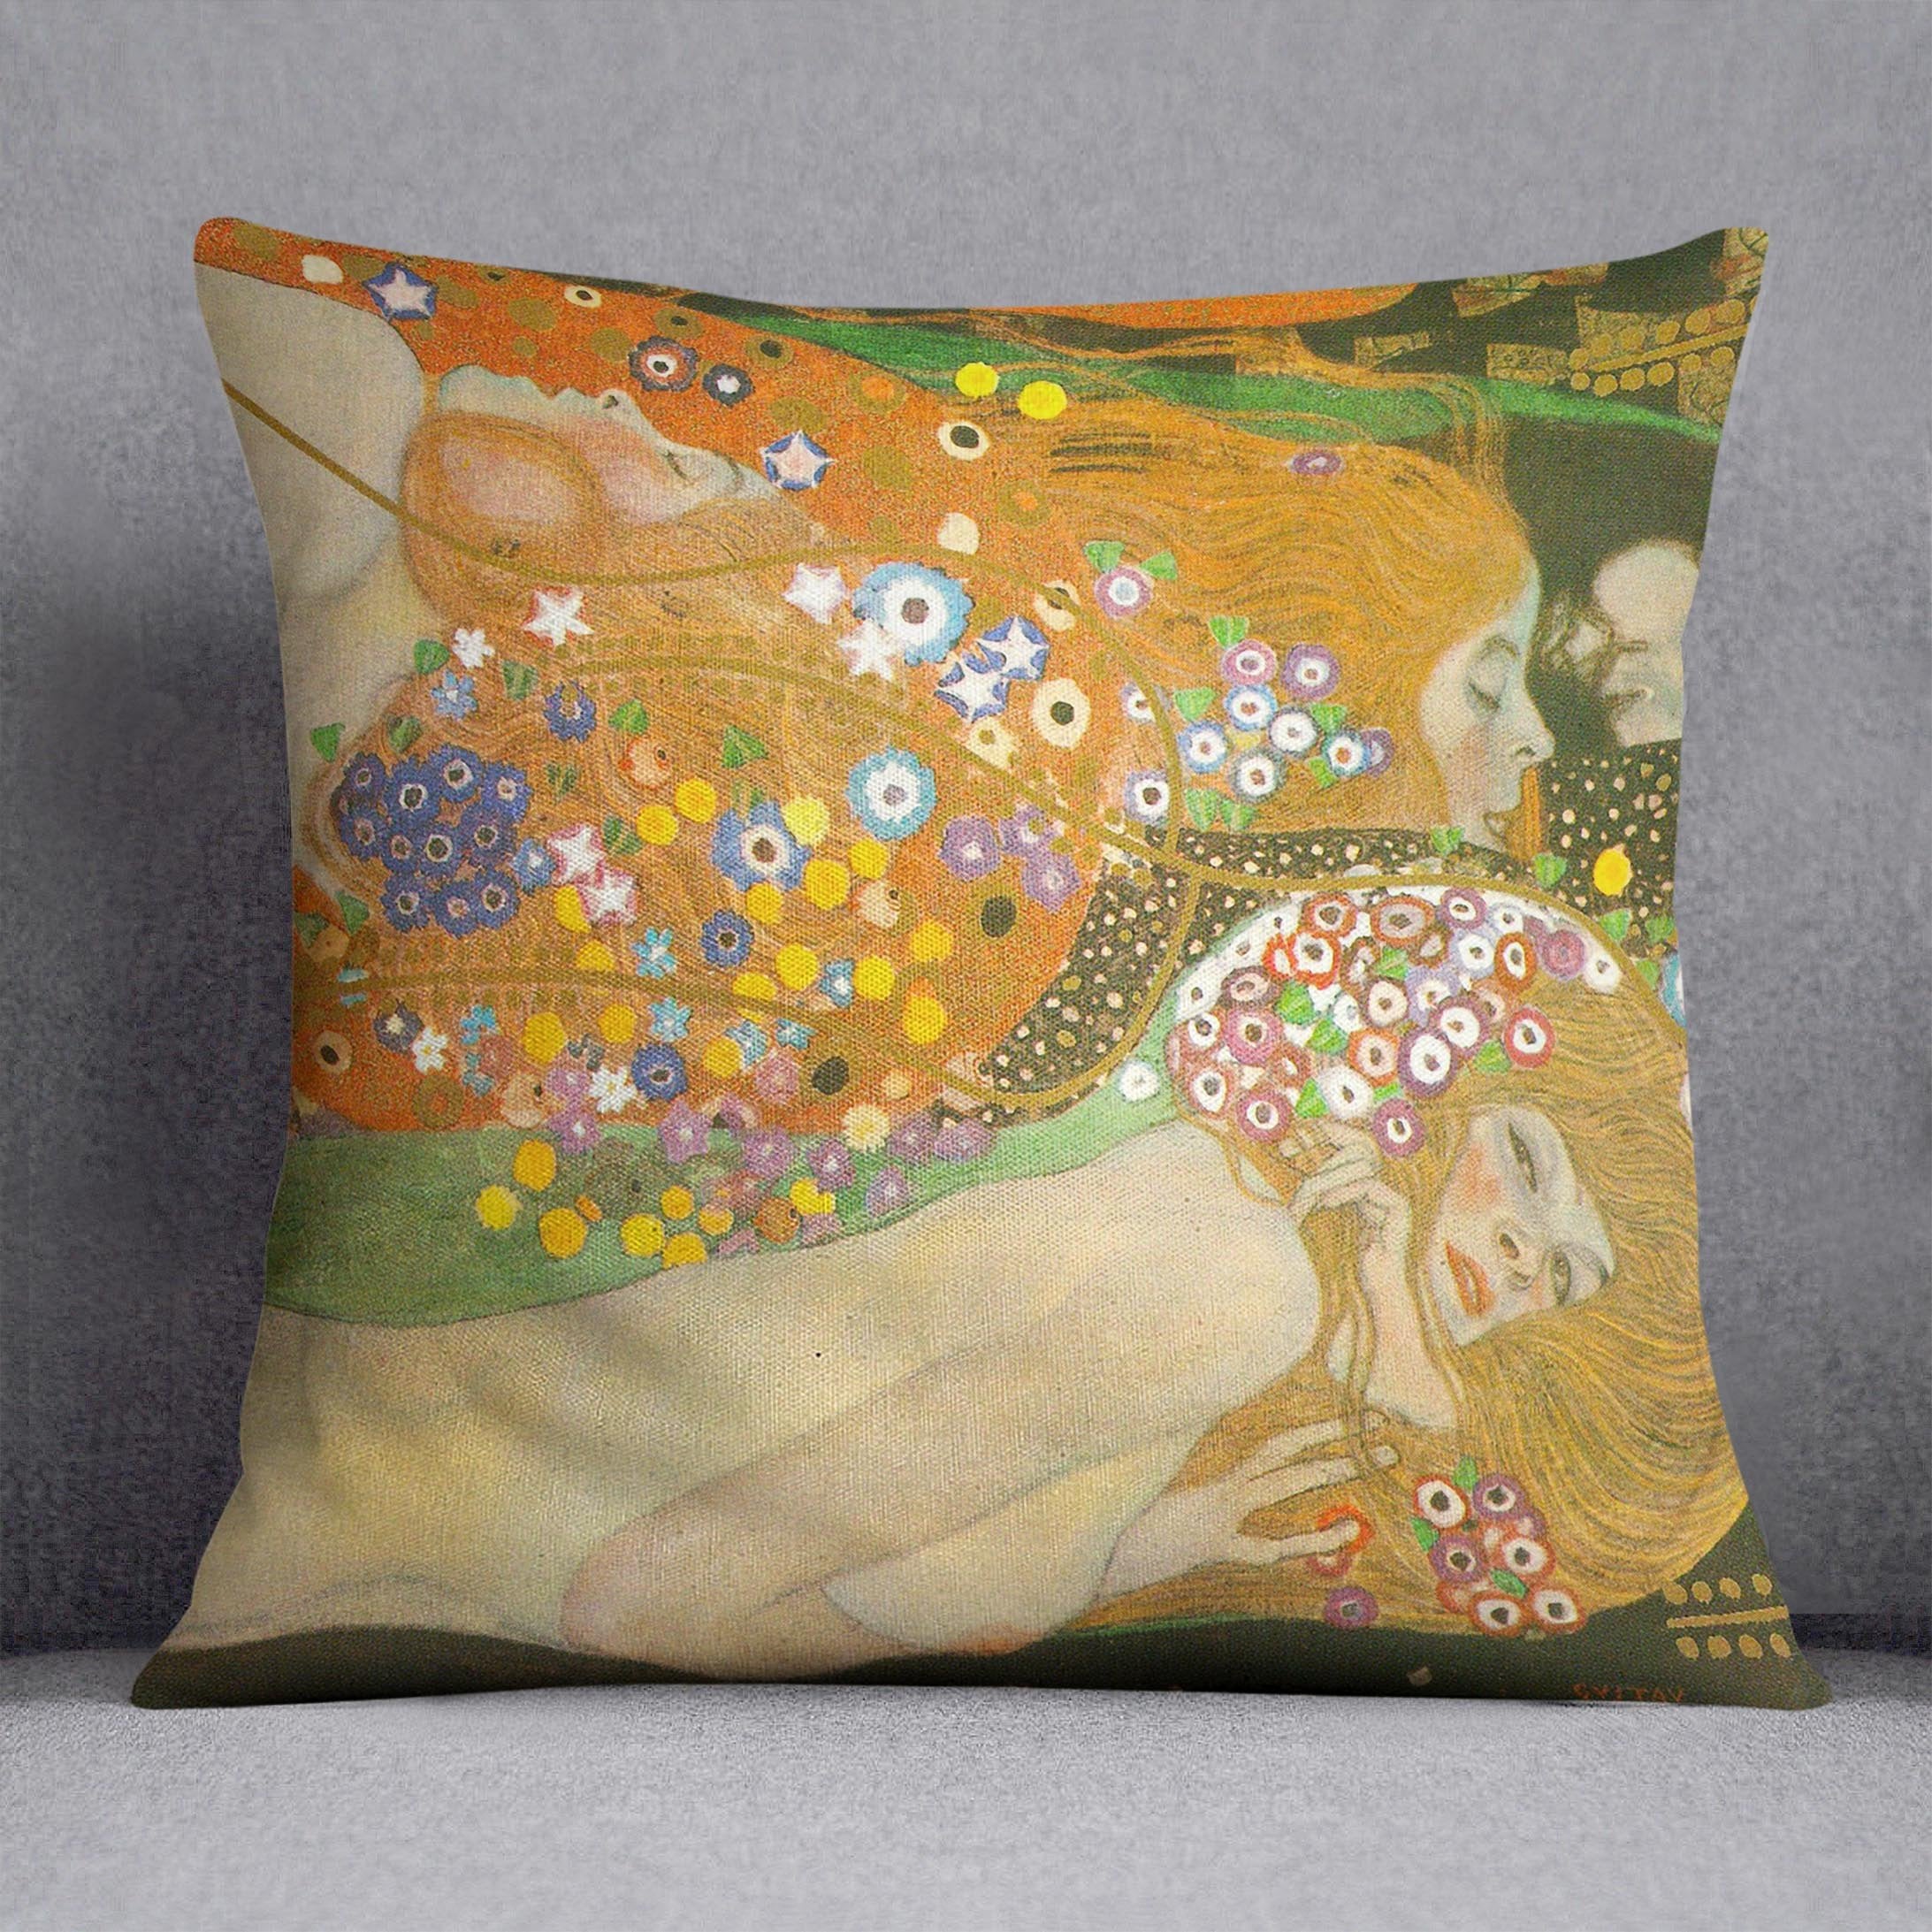 Water snakes friends II by Klimt Throw Pillow